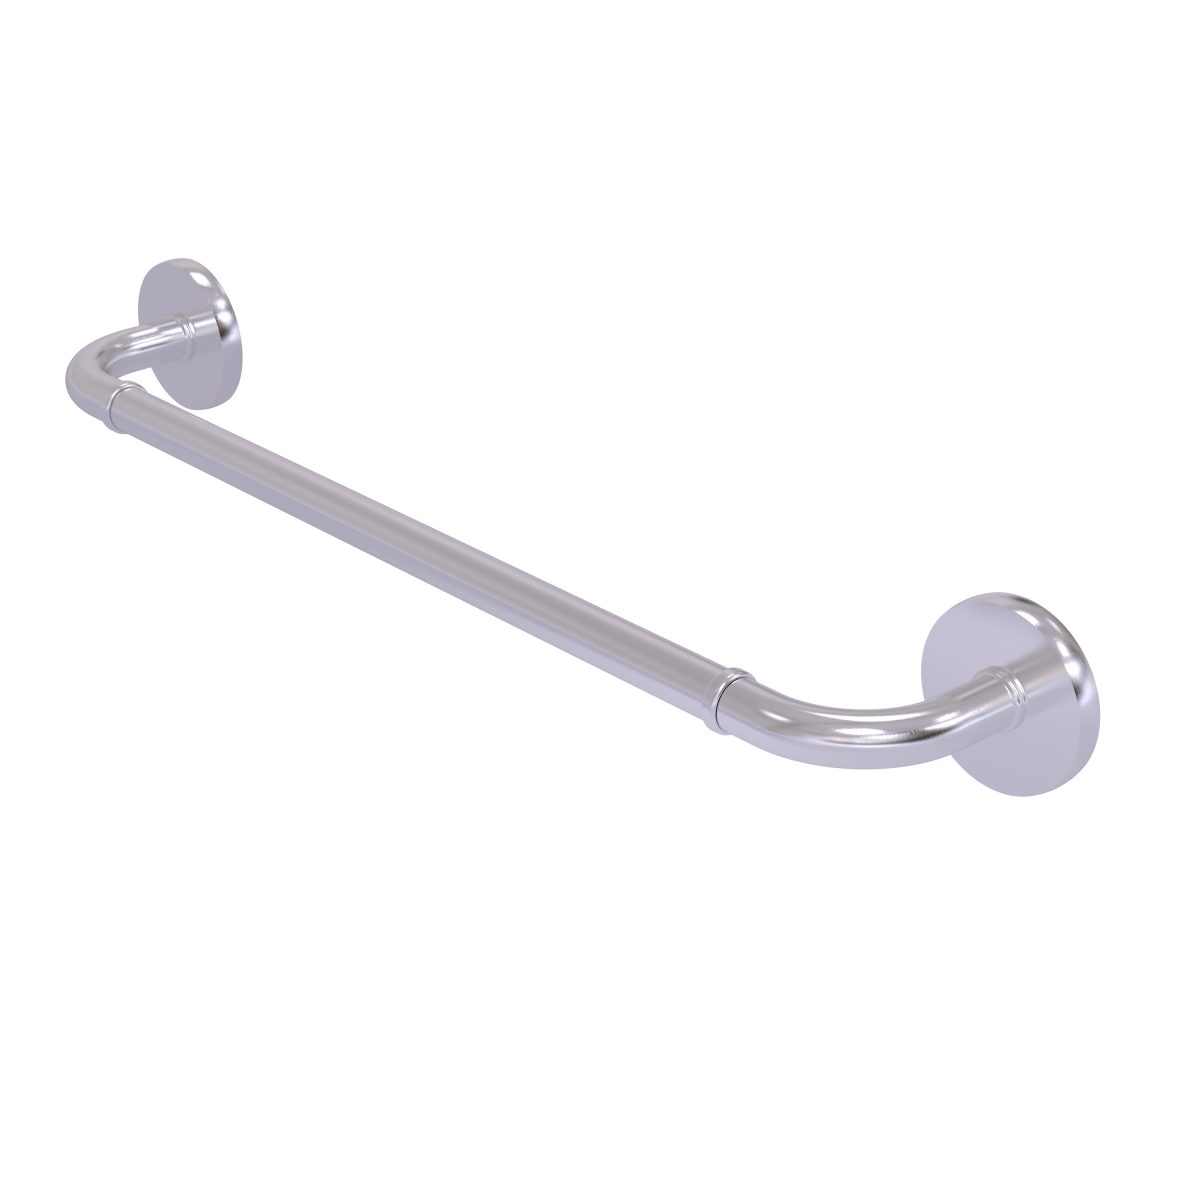 Allied Brass RM-41-18-SCH 18 in. Remi Collection Towel Bar, Satin Chrome